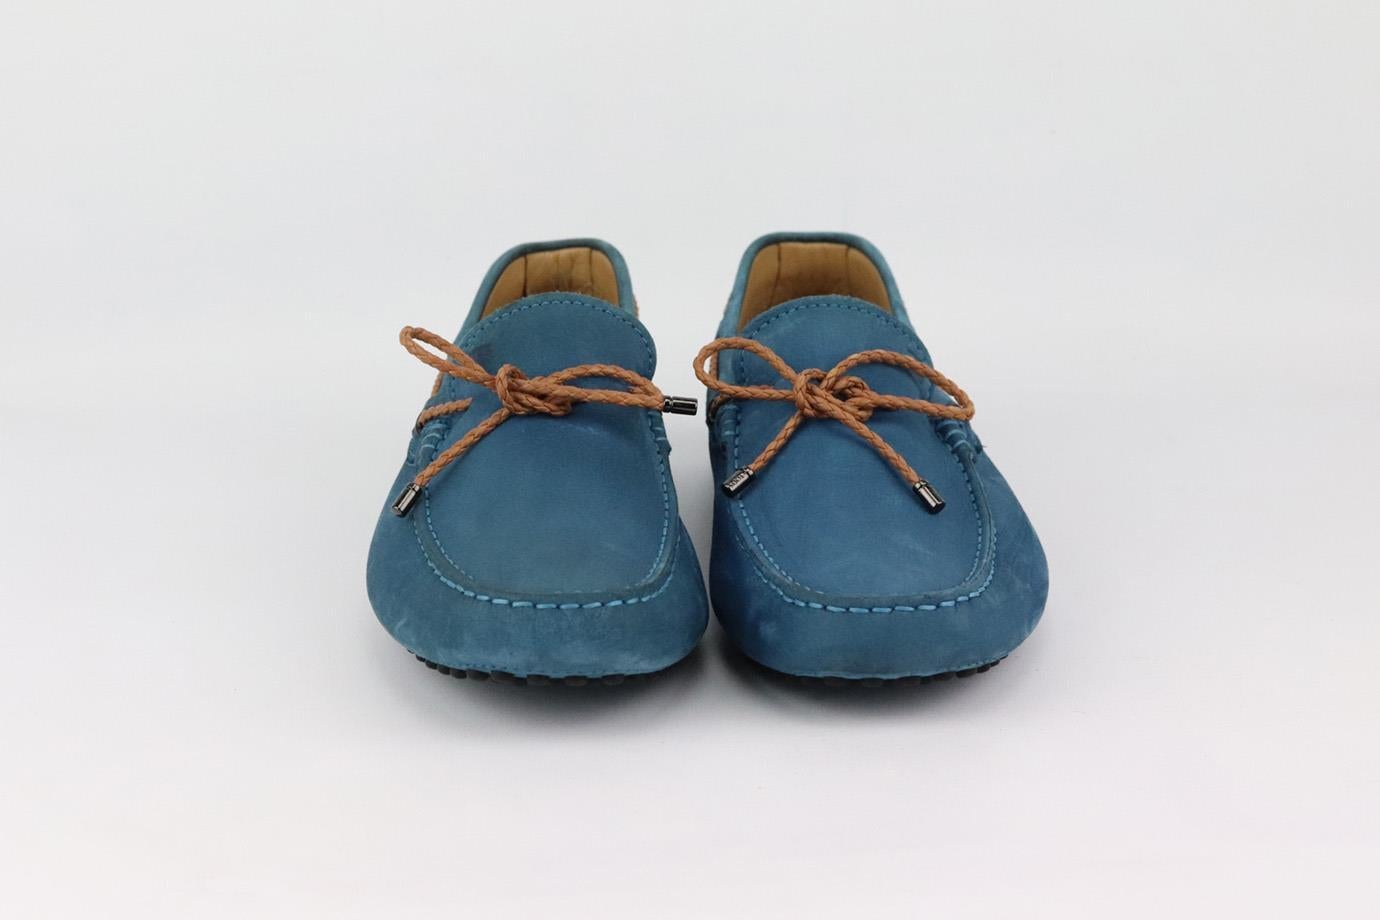 These 'Gommino' loafers by Tod’s are made by hand in Italy and features the brand's signature rubber pebble sole - offering comfort and maximum traction, this light-blue suede style is a contemporary alternative to classic black, and just as